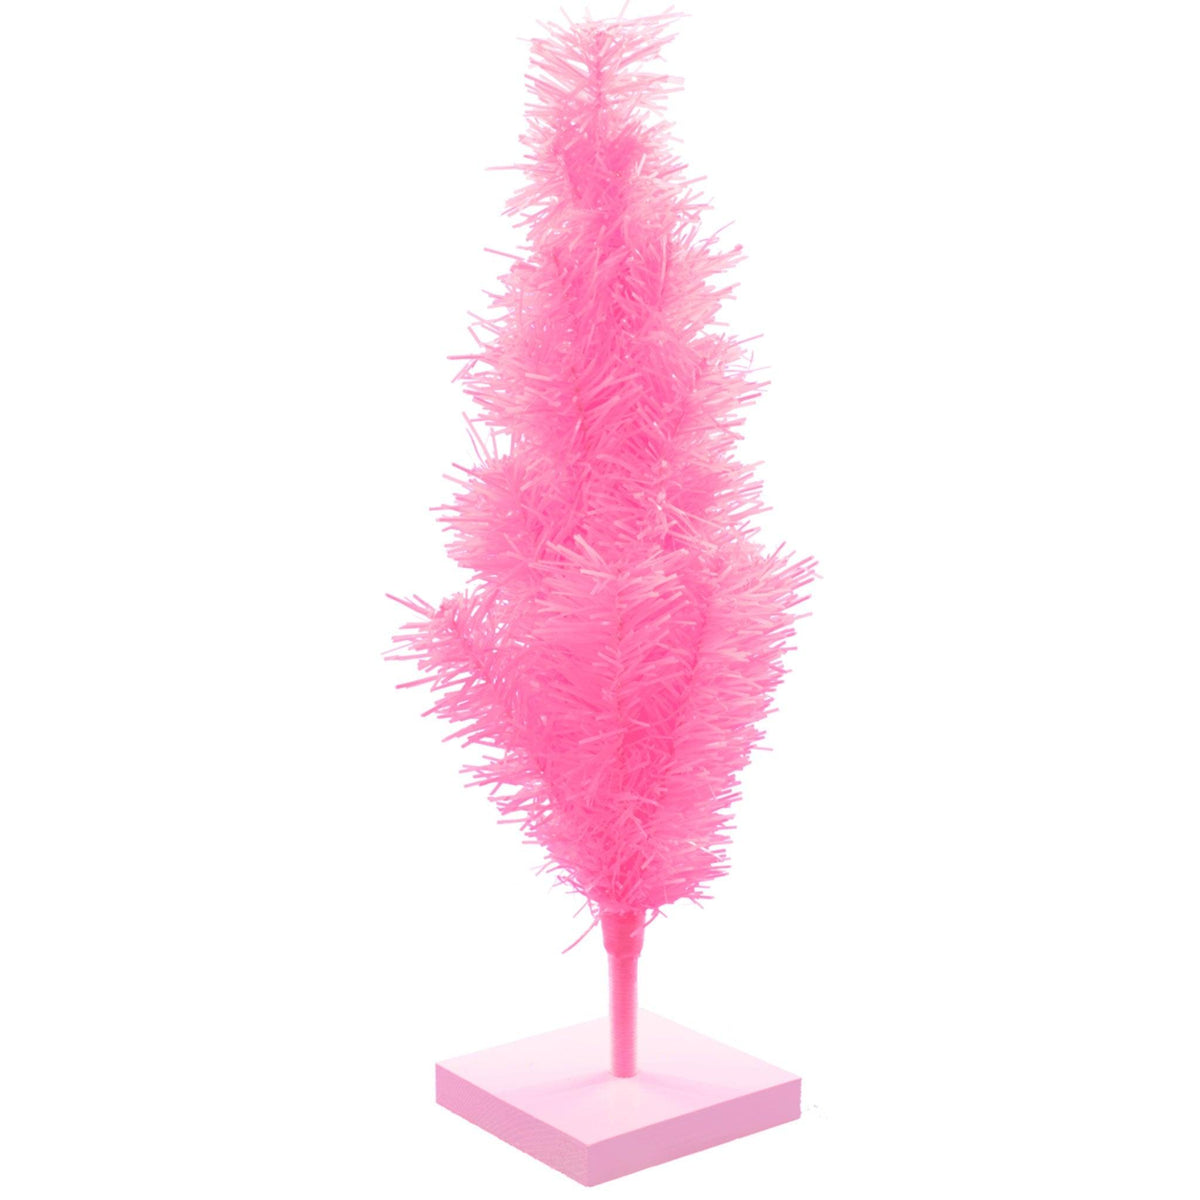 Lee Display's 18in pink tinsel trees are made with wired branches that fold up in any direction for easy storage and styling